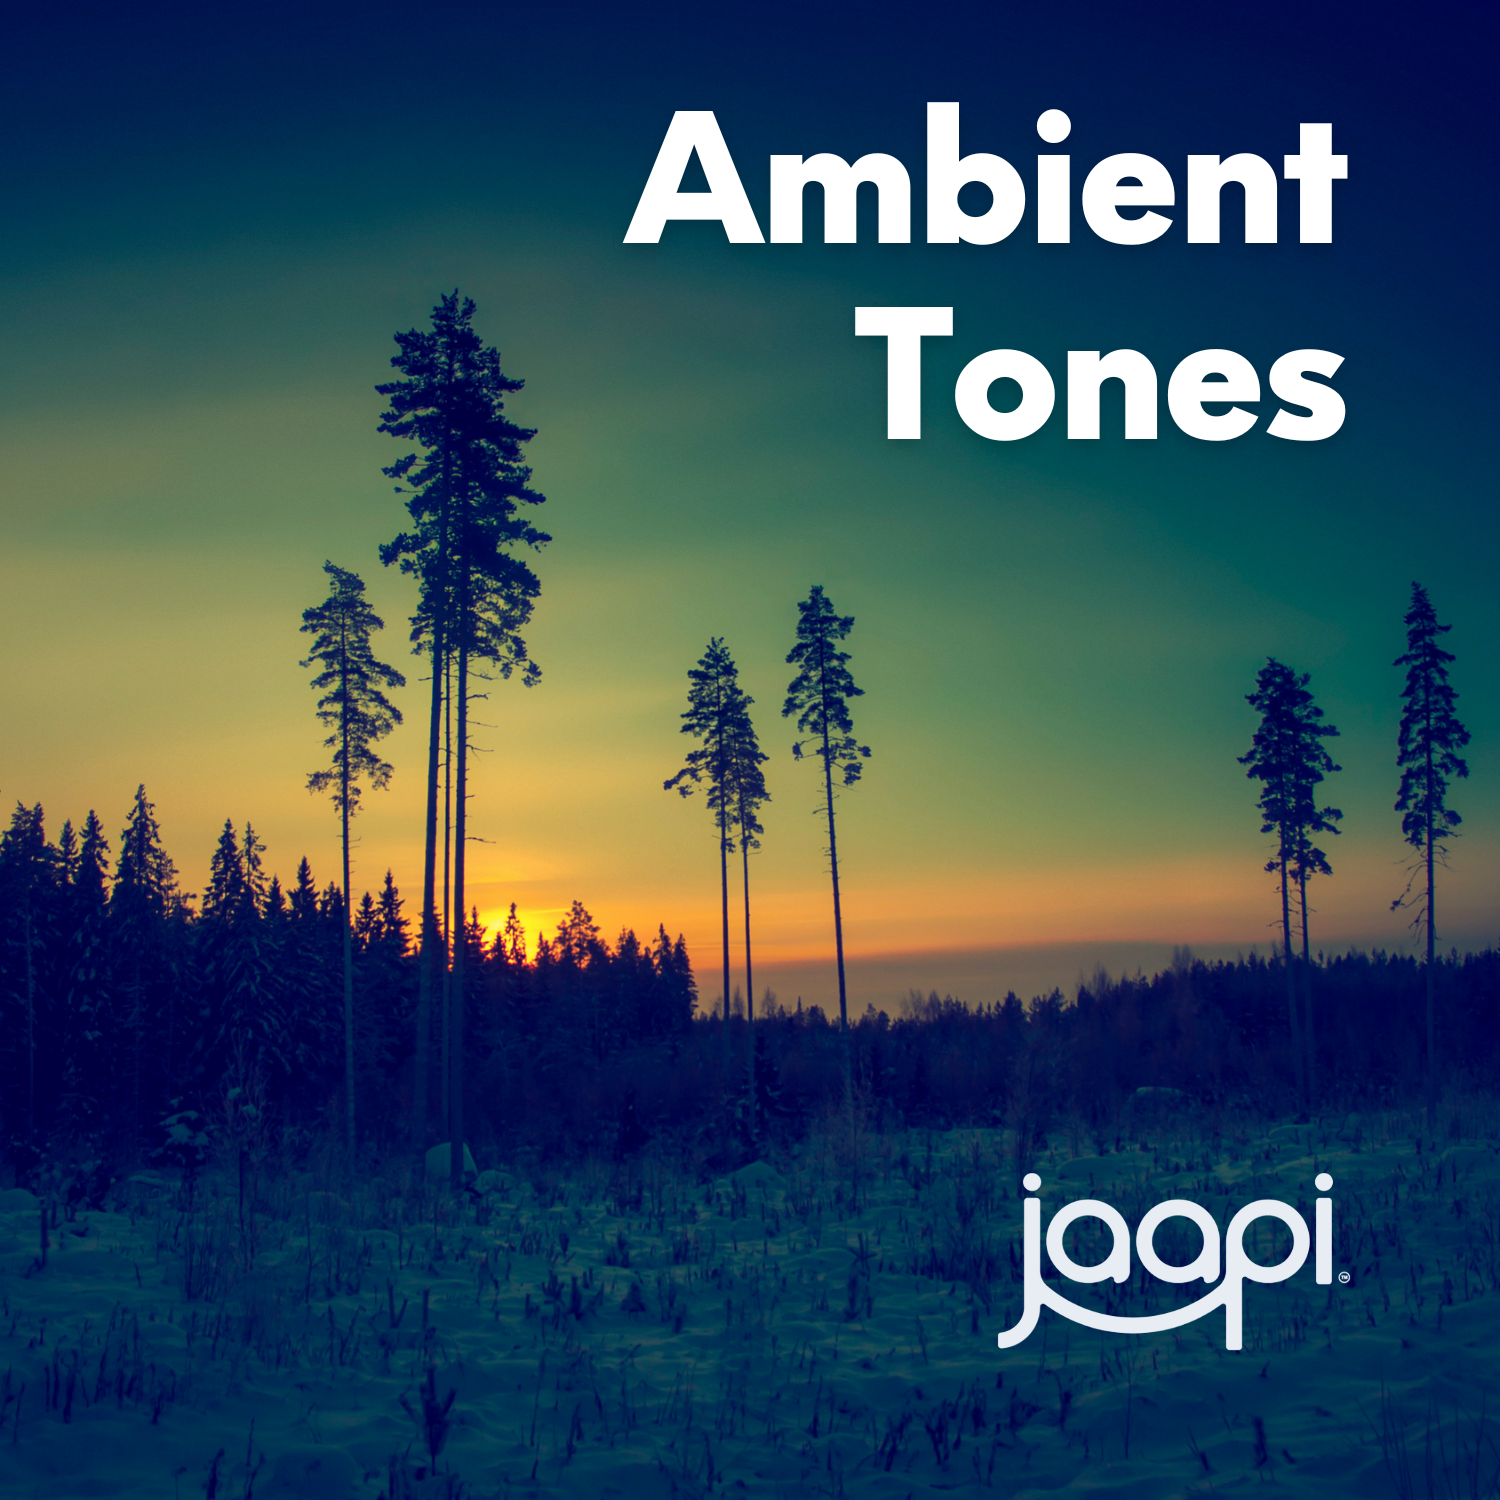 Ambient Tones: Drones, and textures to slip away. Curated by Jaapi Media.